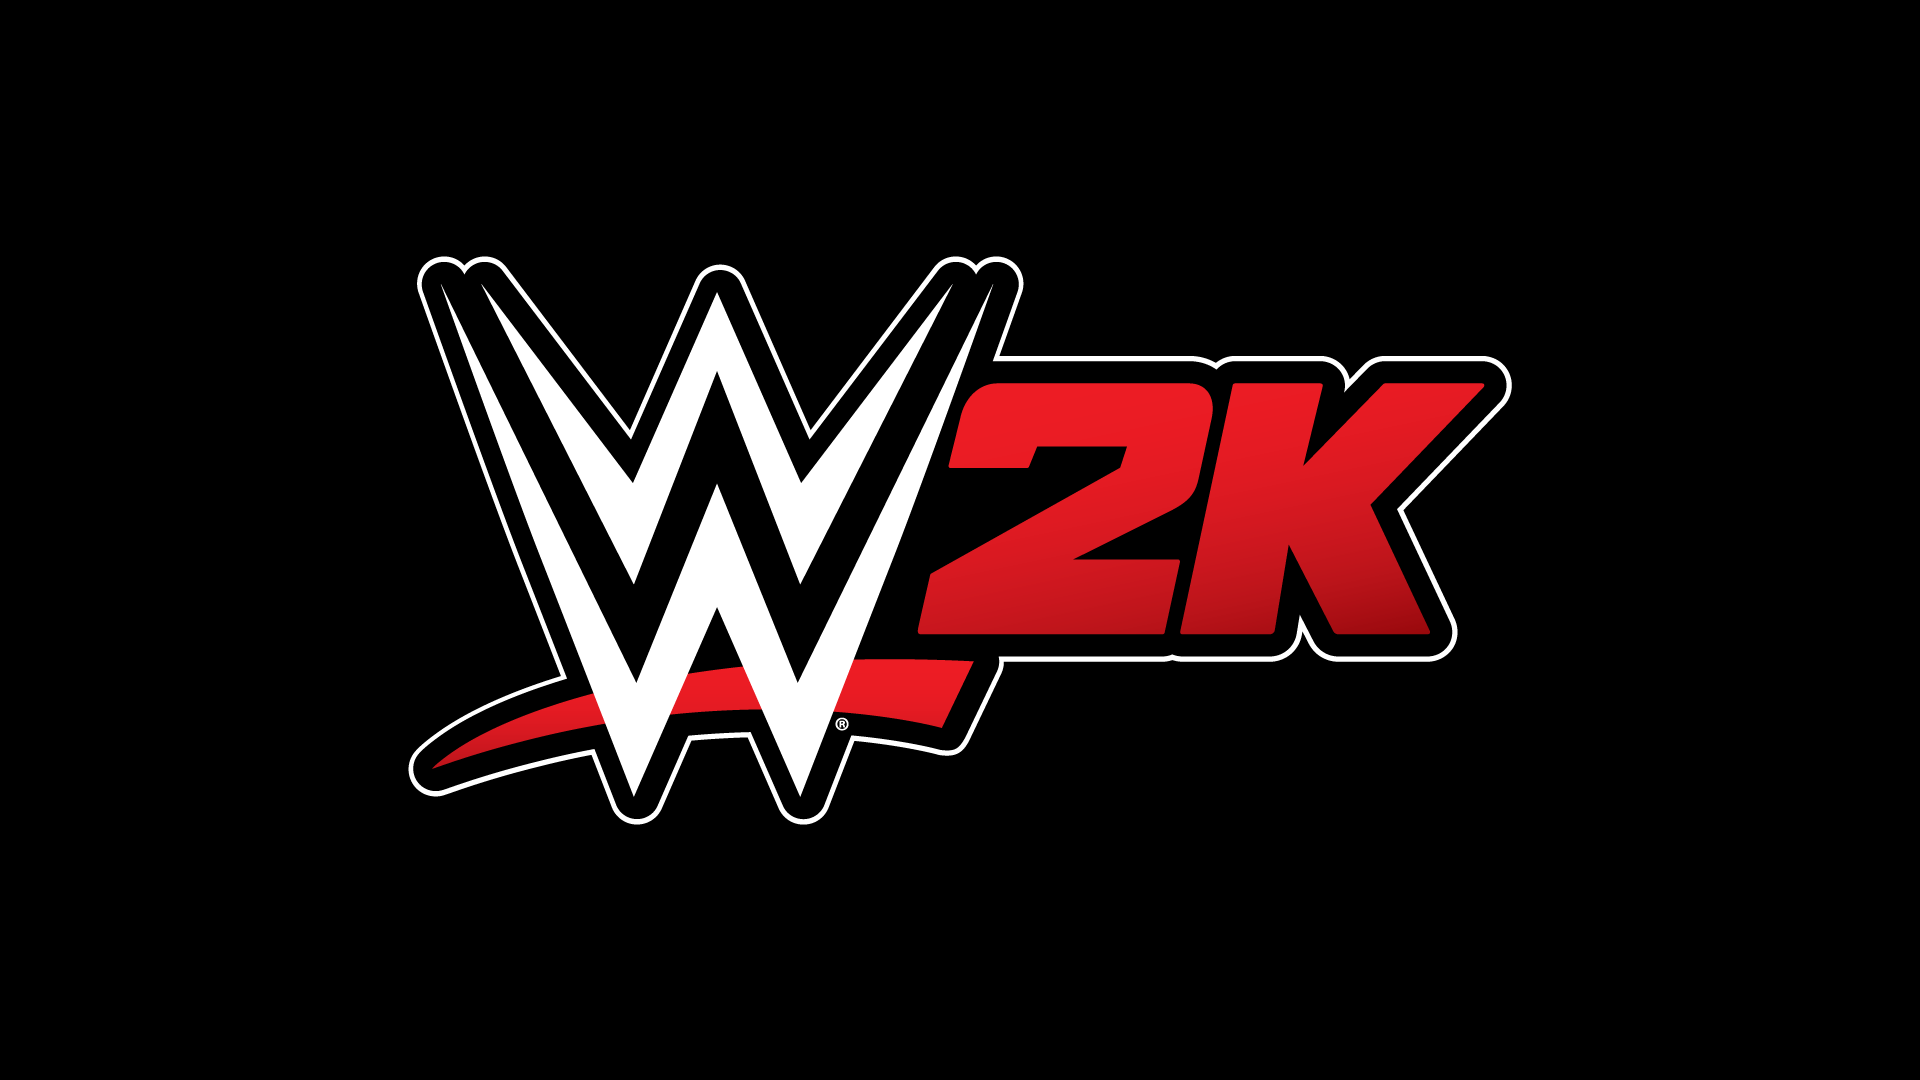 WWE 2K Battlegrounds to Lead the Charge into the Future of 2K's WWE Game Experiences